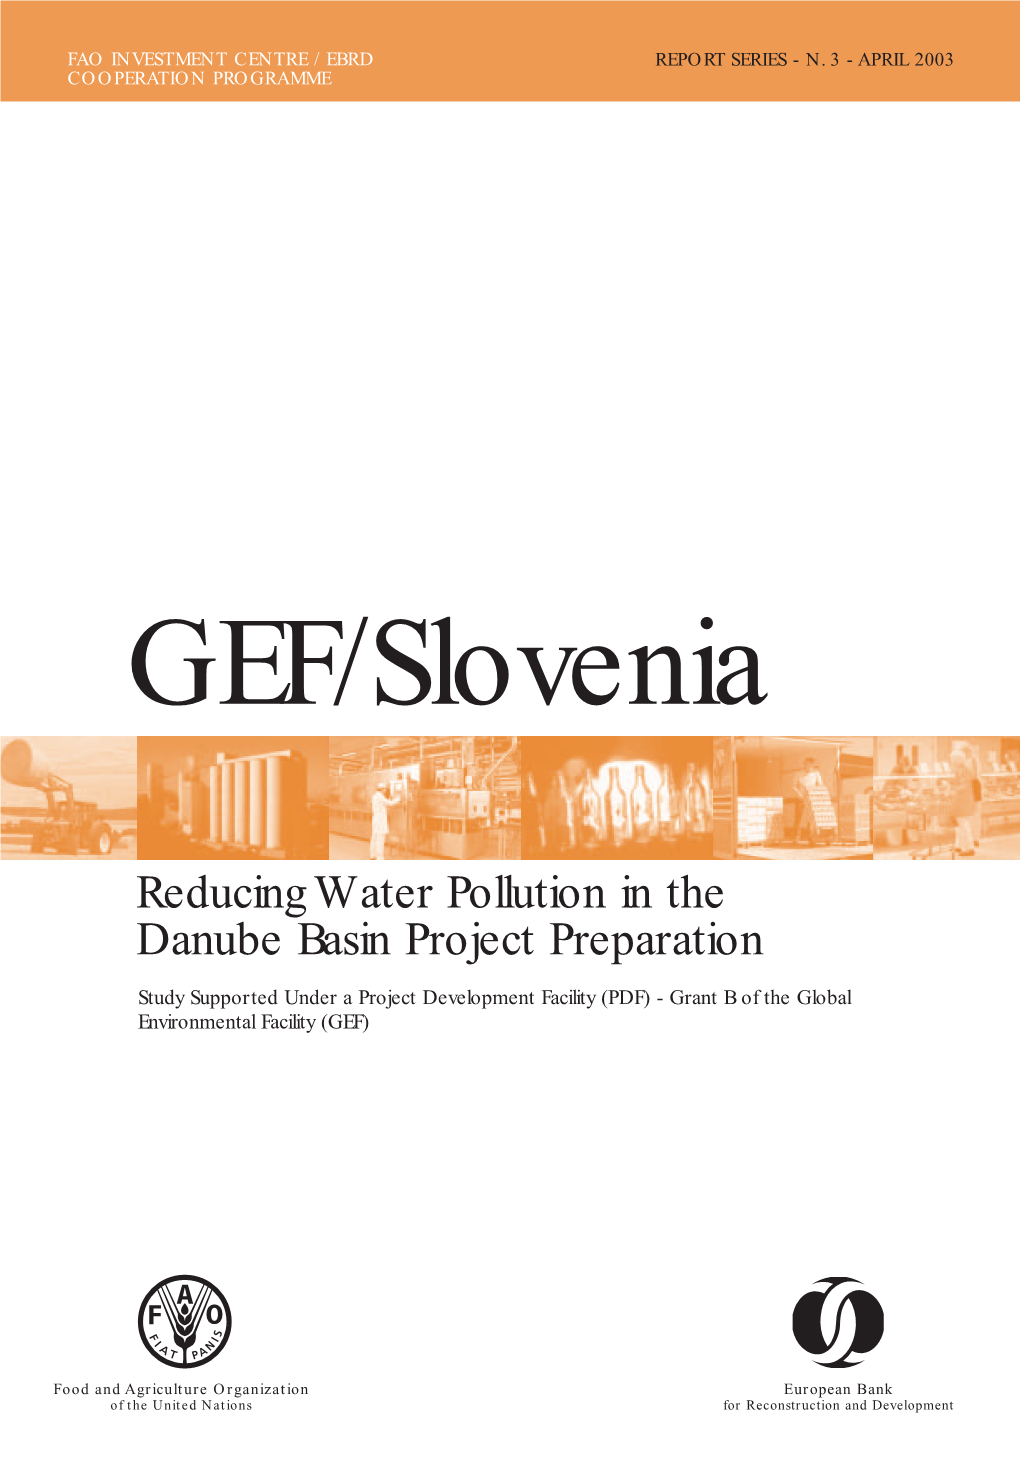 GEF/SLOVENIA: Reducing Water Pollution in the Danube Basin – Project Preparation